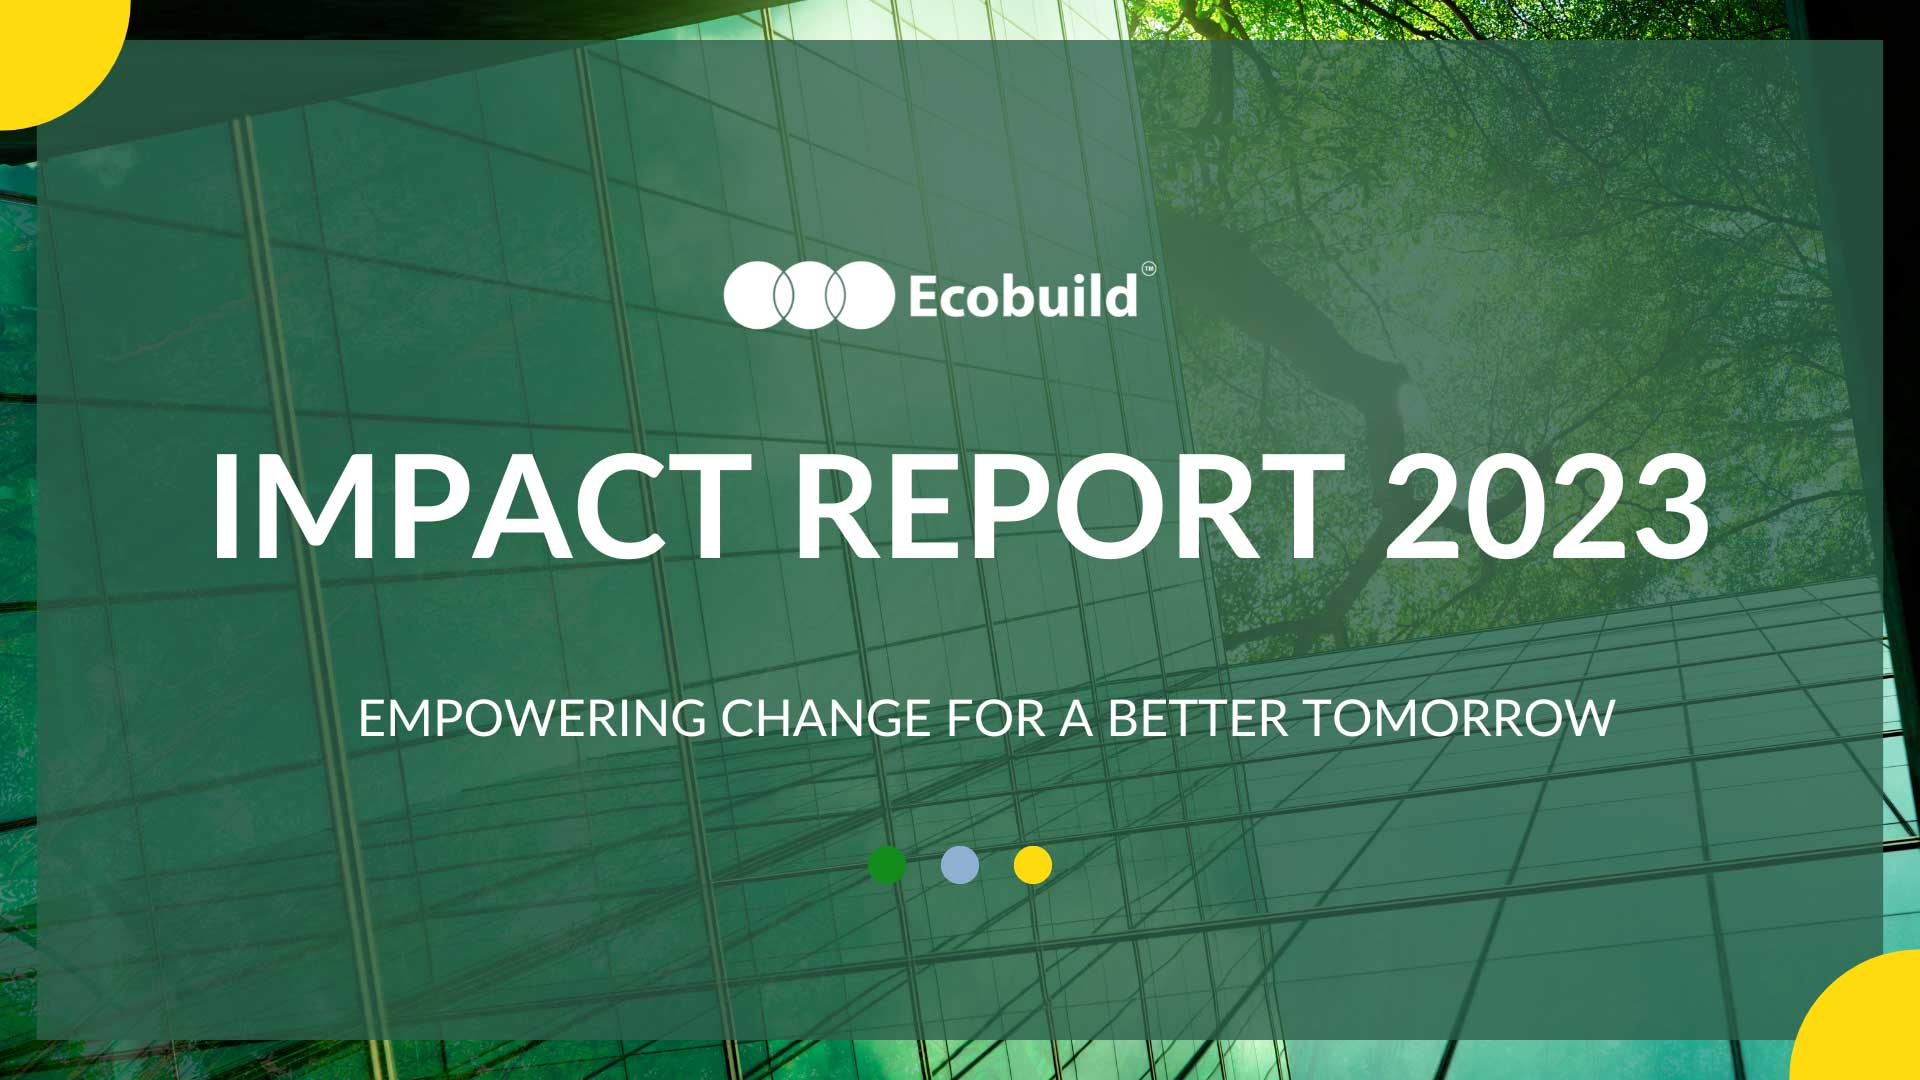 Ecobuild Releases The First Impact Report 2023